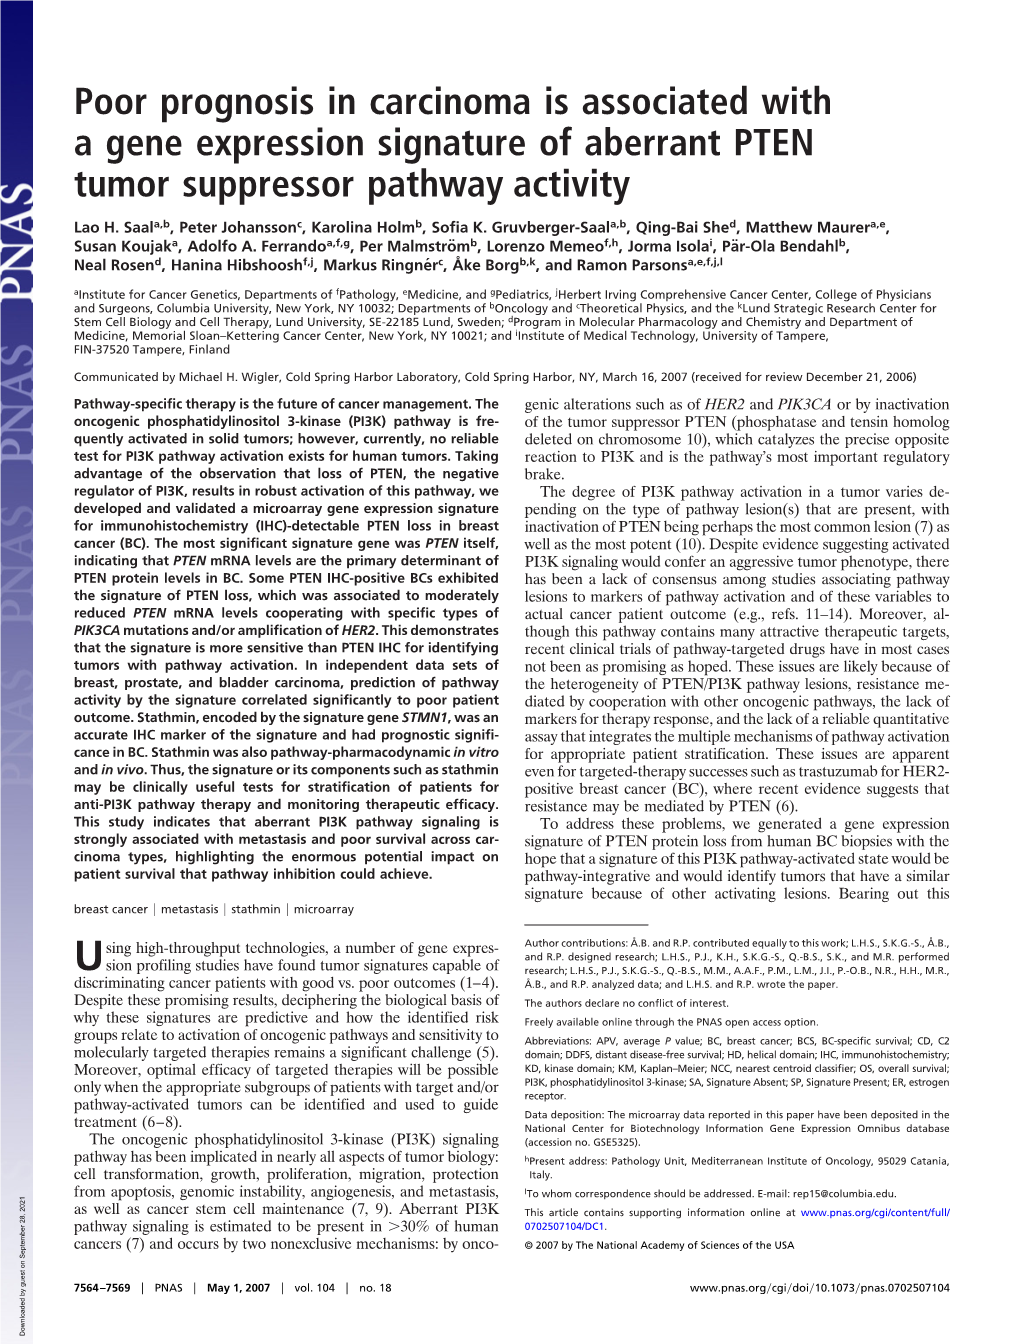 Poor Prognosis in Carcinoma Is Associated with a Gene Expression Signature of Aberrant PTEN Tumor Suppressor Pathway Activity